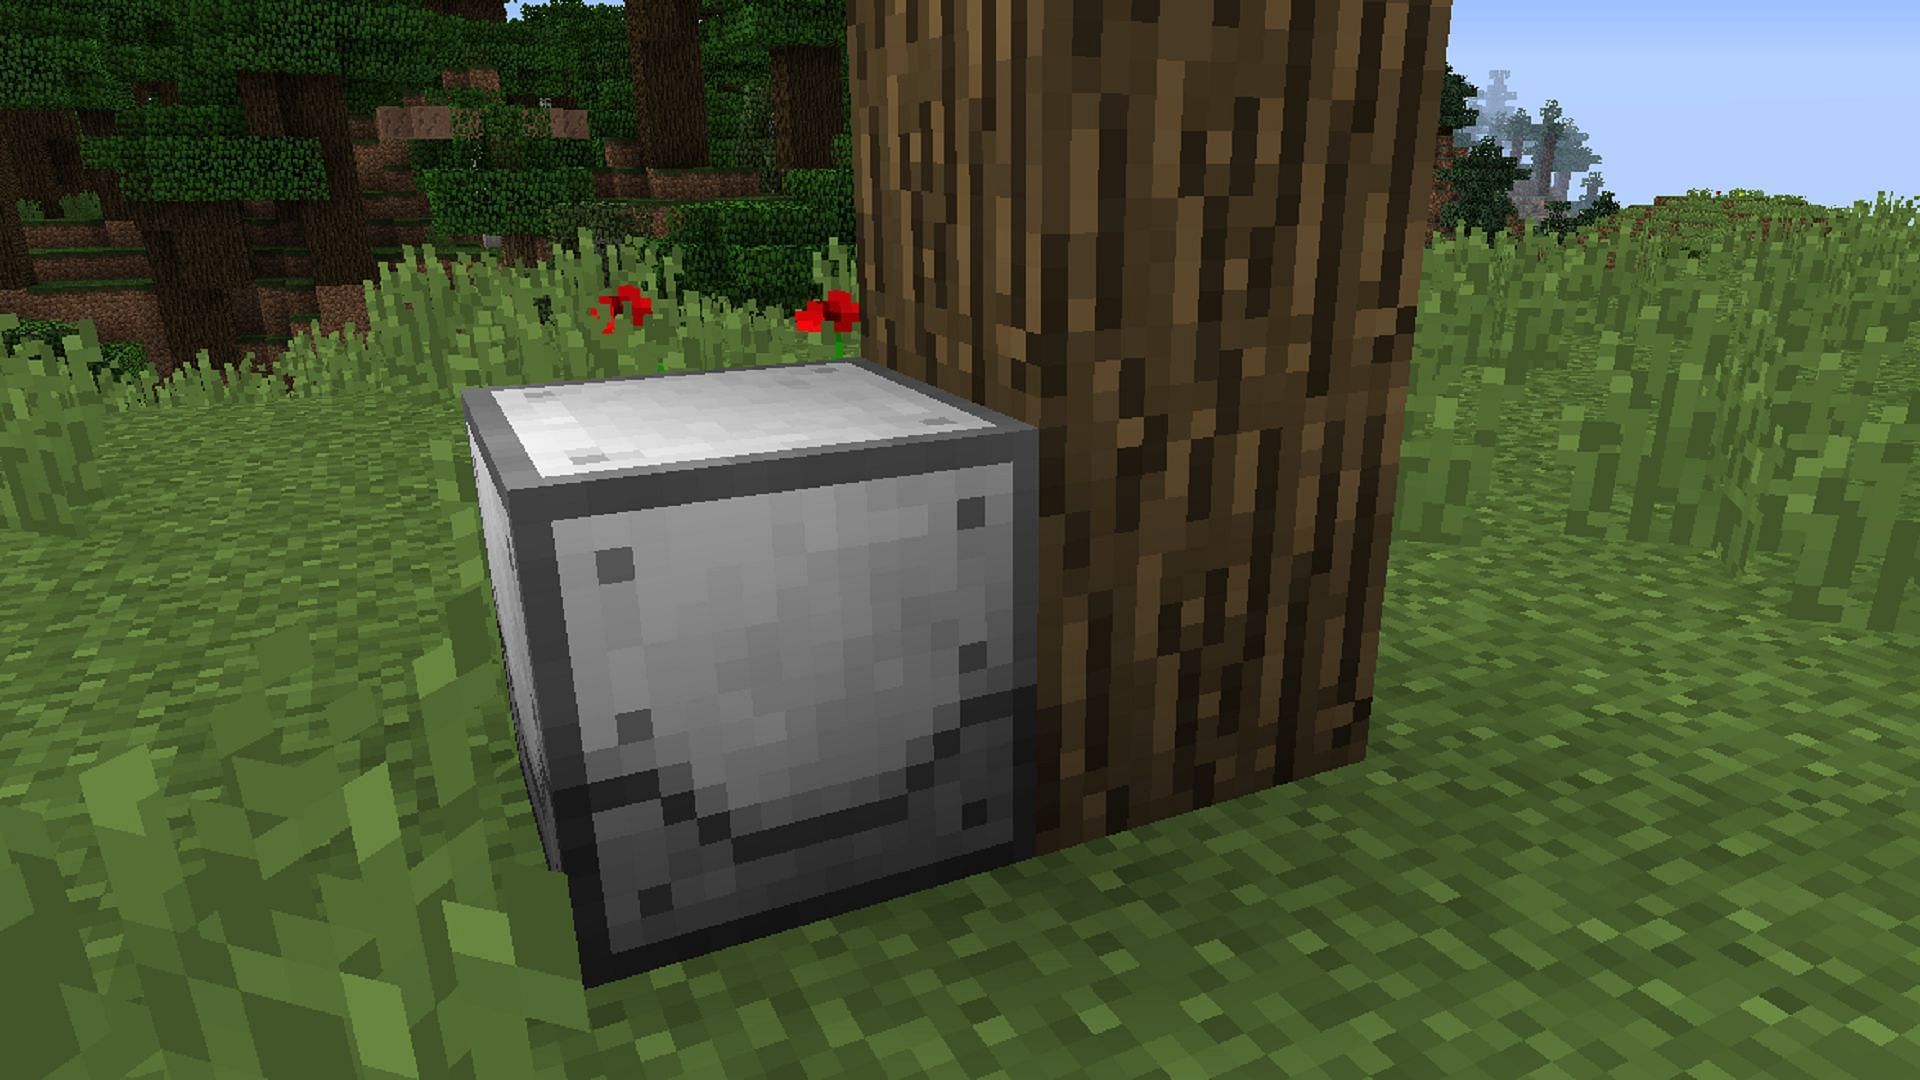 A tree fluid extractor pulls latex from a Minecraft tree in Industrial Foregoing (Image via Buuz135/CurseForge)